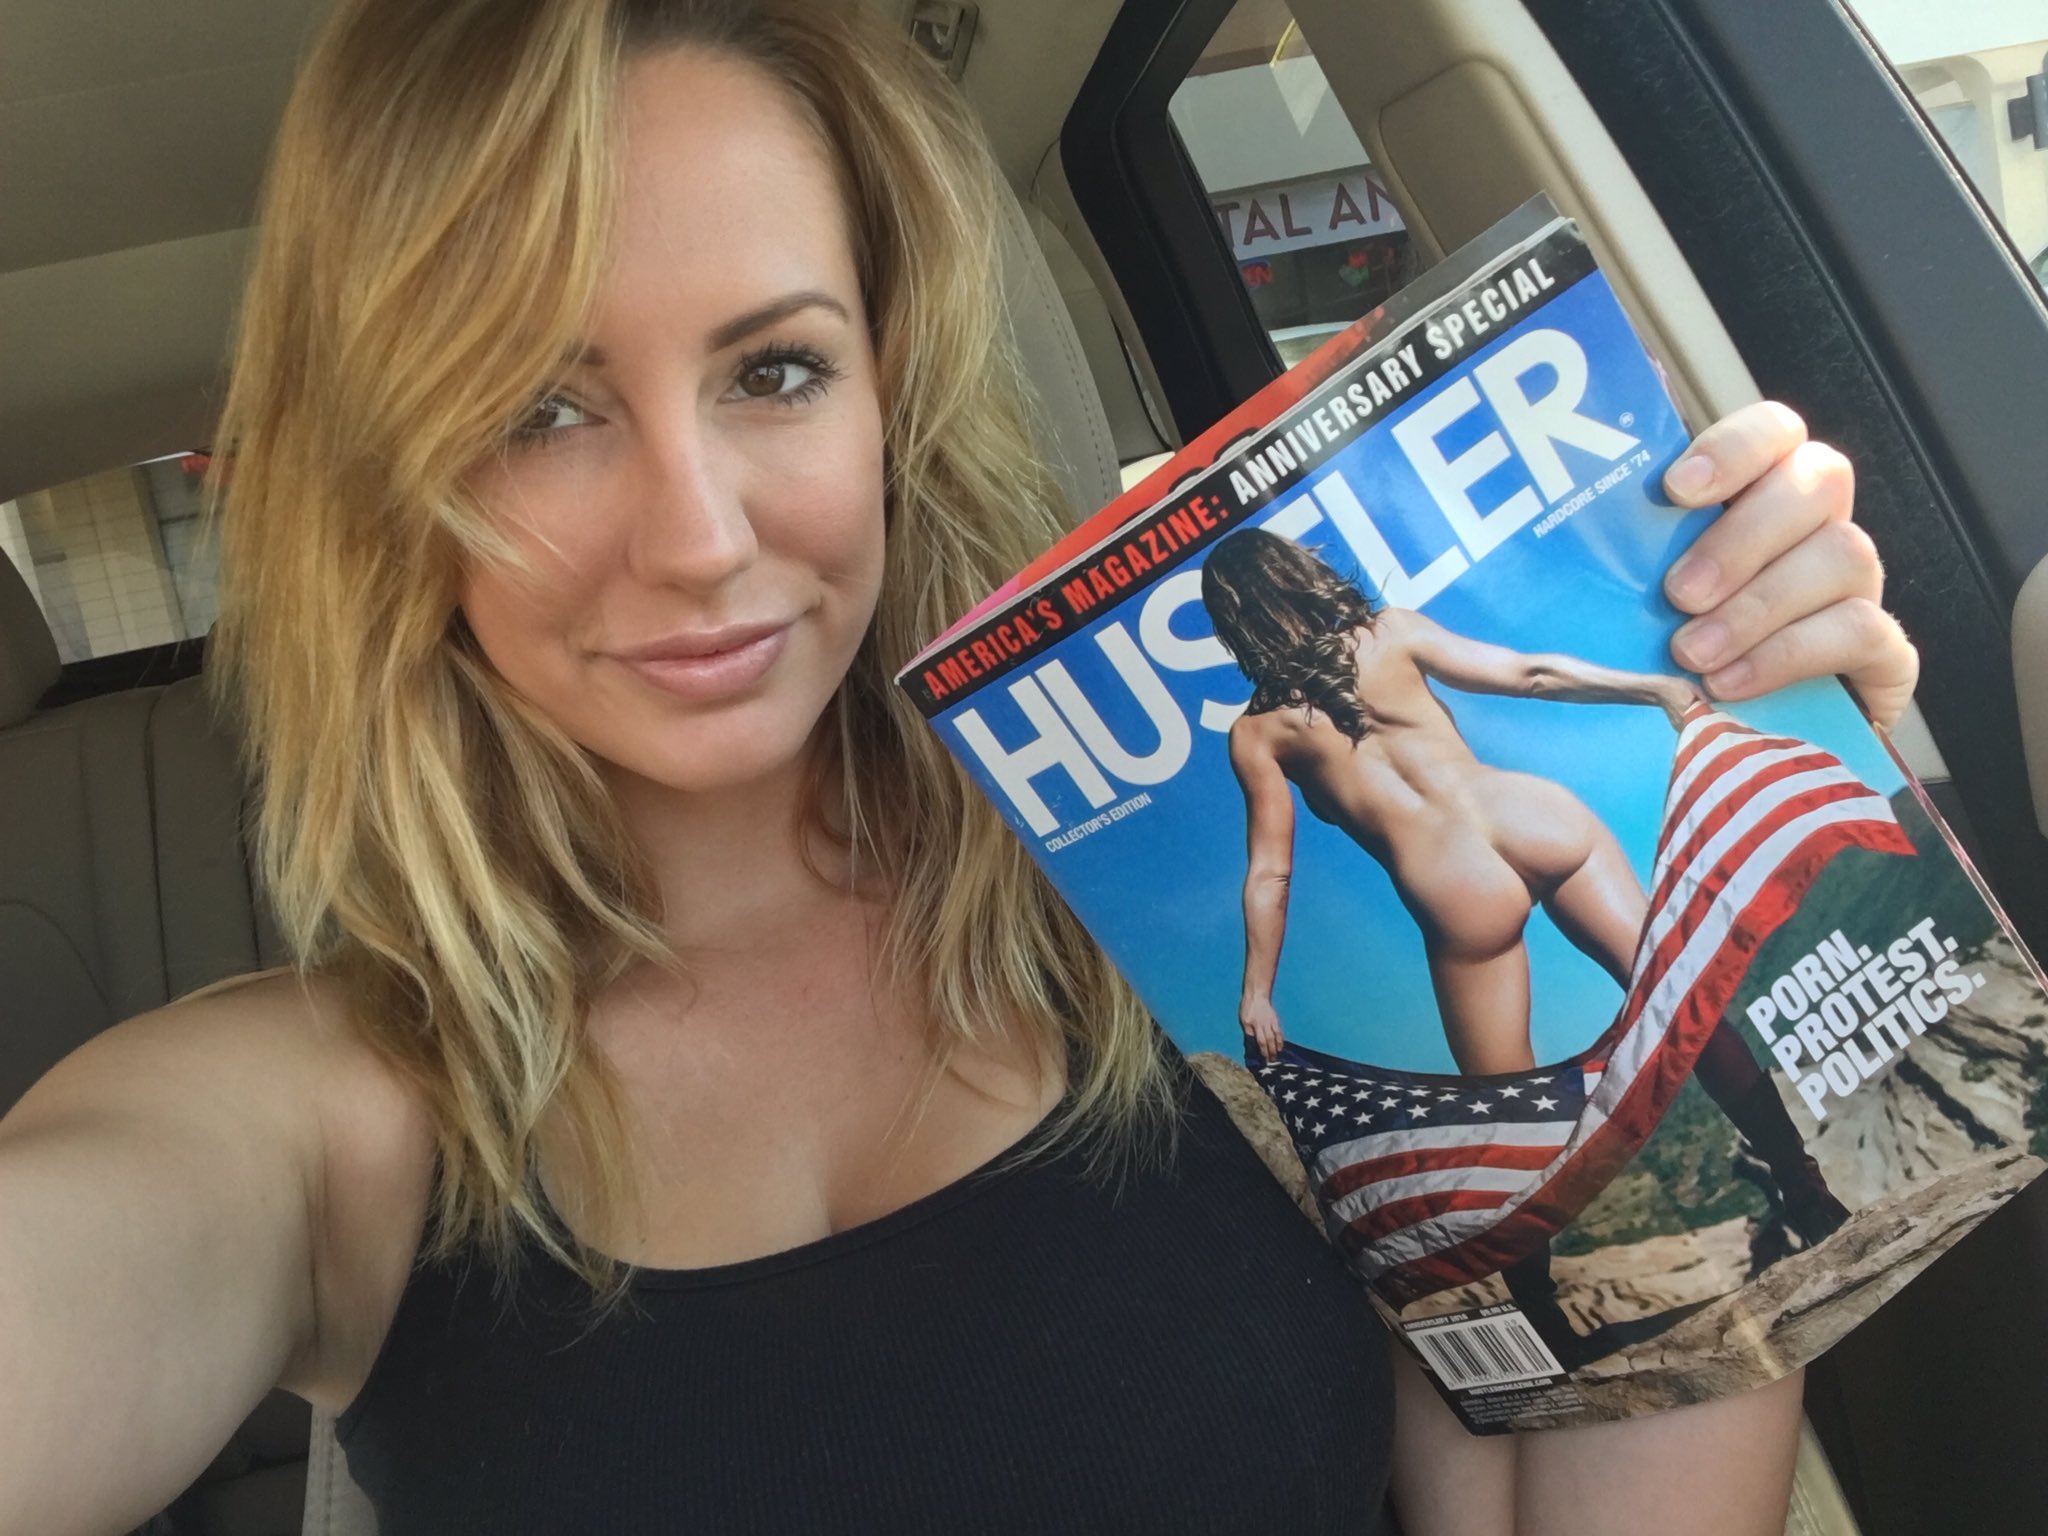 “BRETT ROSSi: Thank you @HustlerMag for making my sister @MissSaintXXX and ...